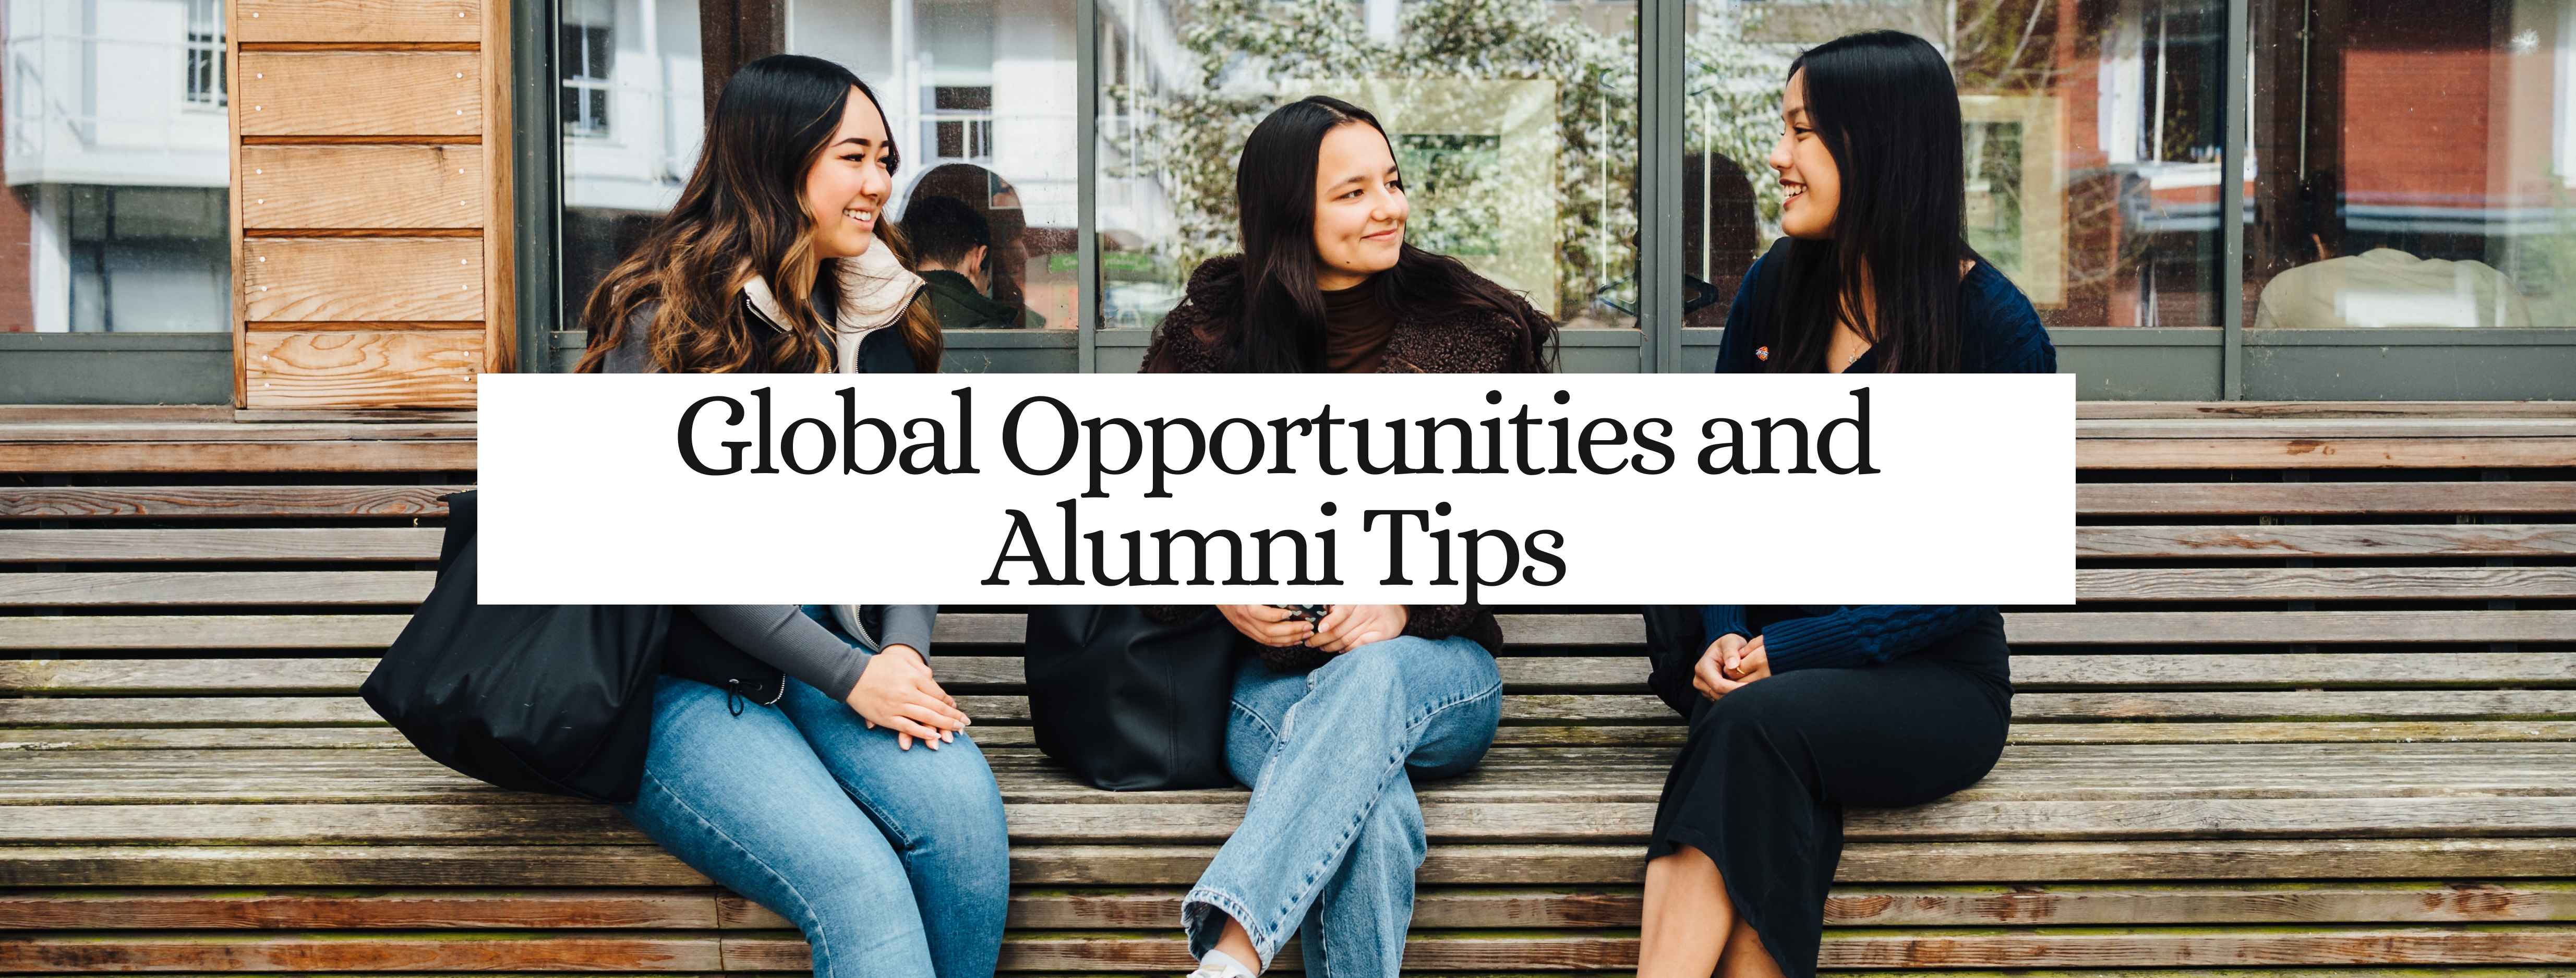 Global Opportunities and Alumni Tips